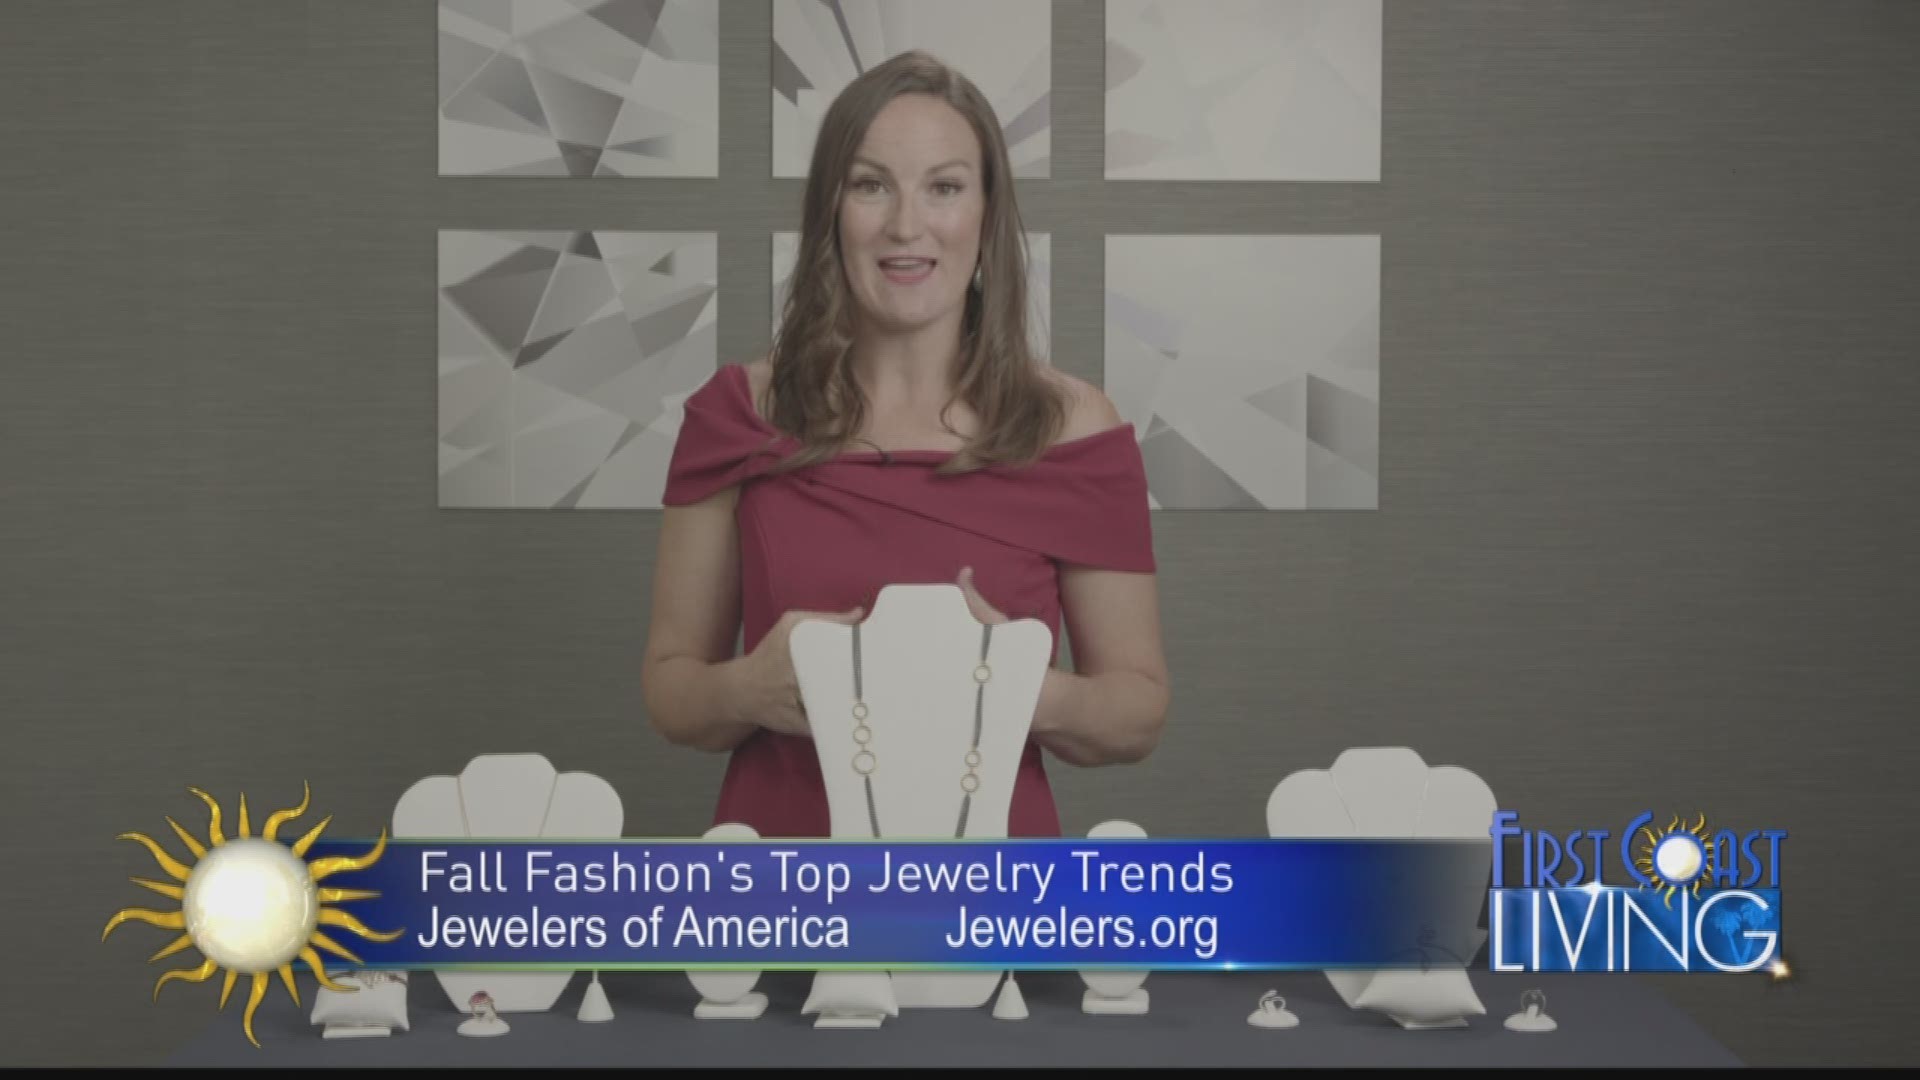 Fall Fashion's Top Jewelry Trends